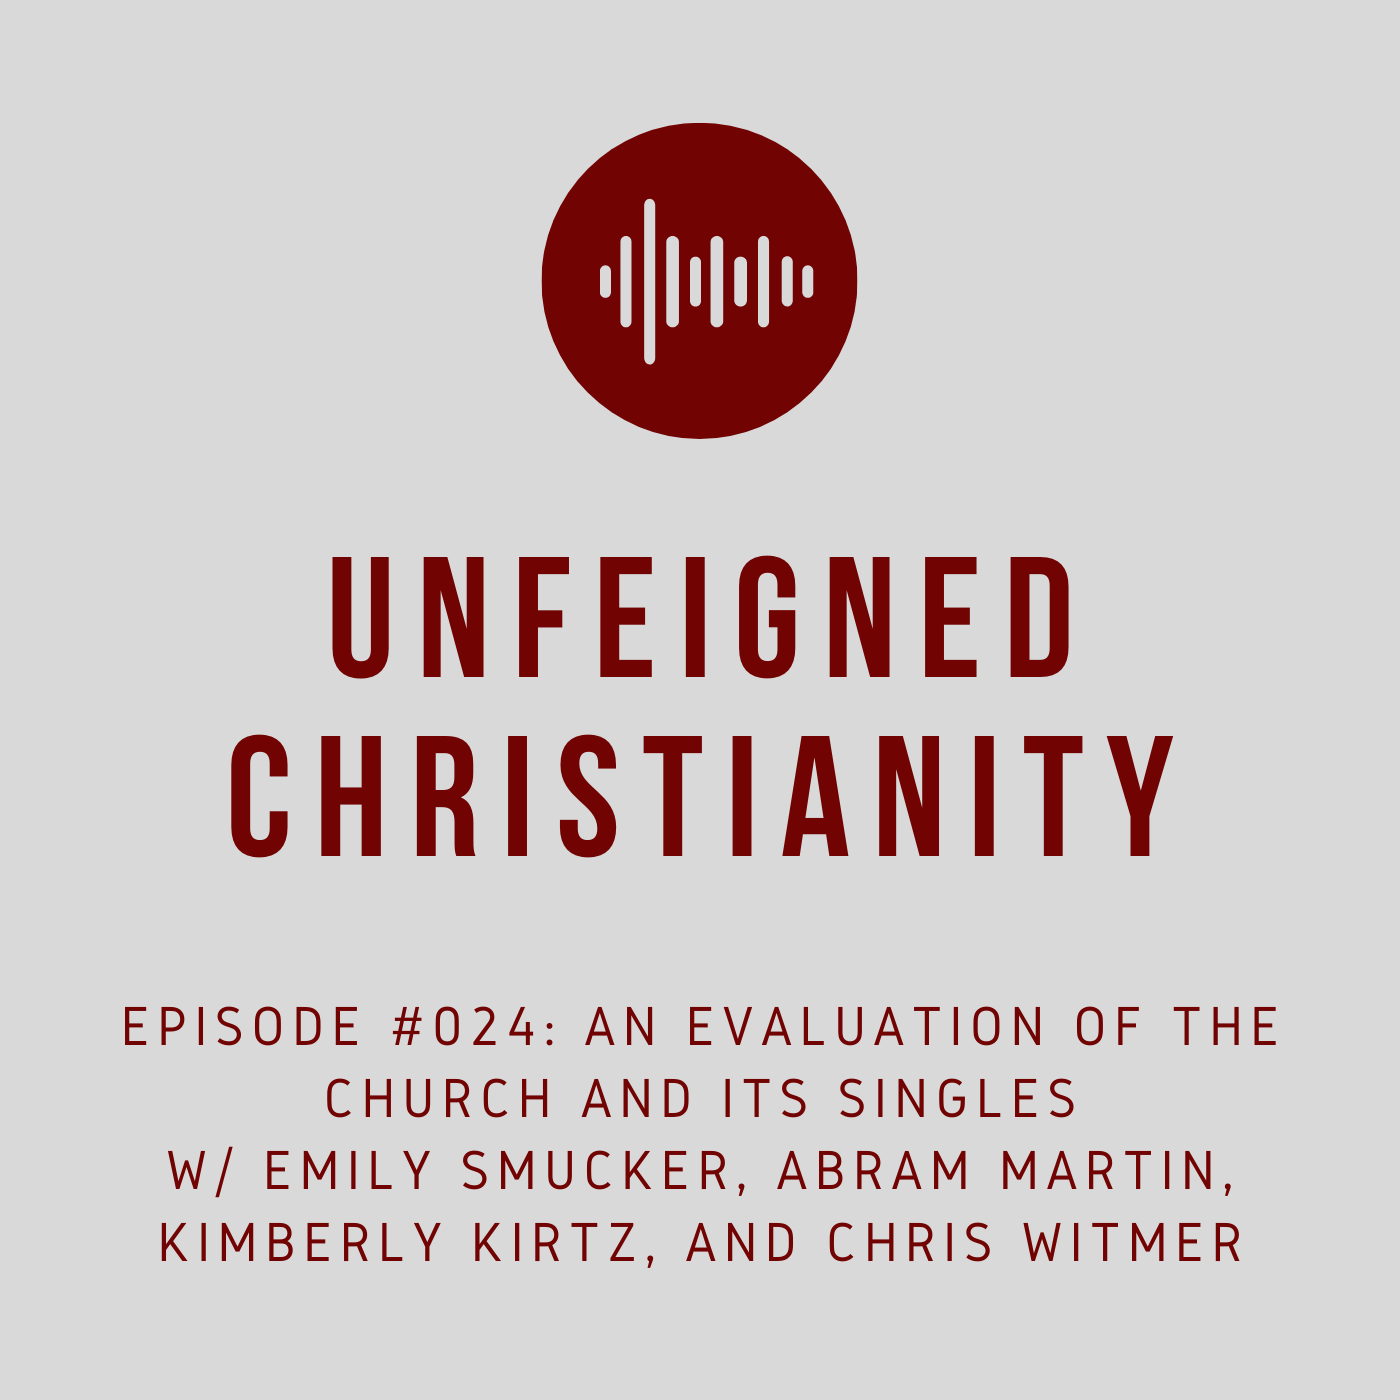 #024 - An Evaluation of the Church and Its Singles w/ Emily Smucker, Abram Martin, Kimberly Kirtz, and Chris Witmer